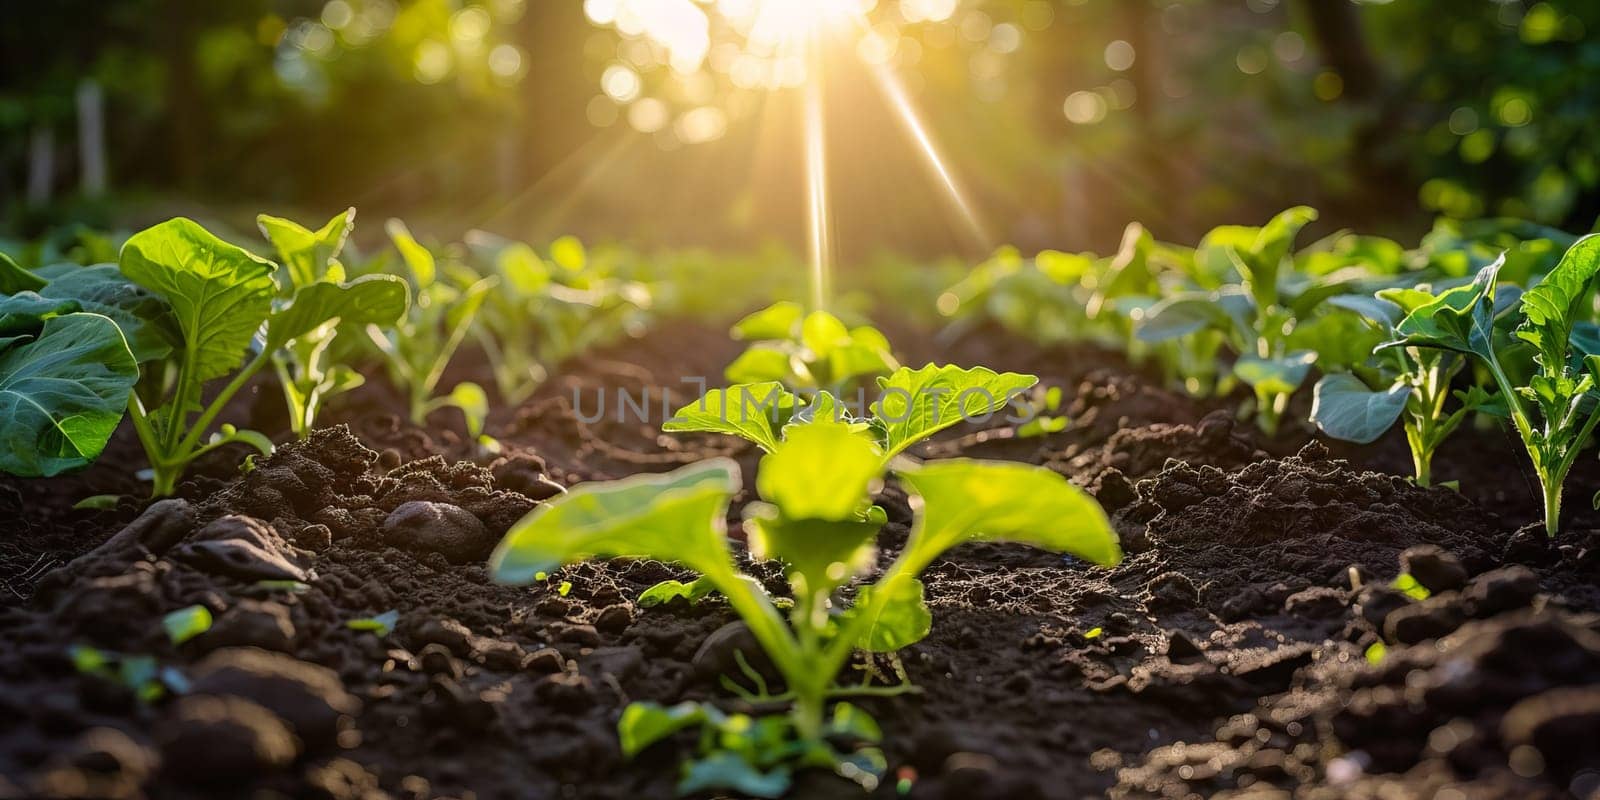 Sunset in the vegetable garden with sunbeams and lens flare